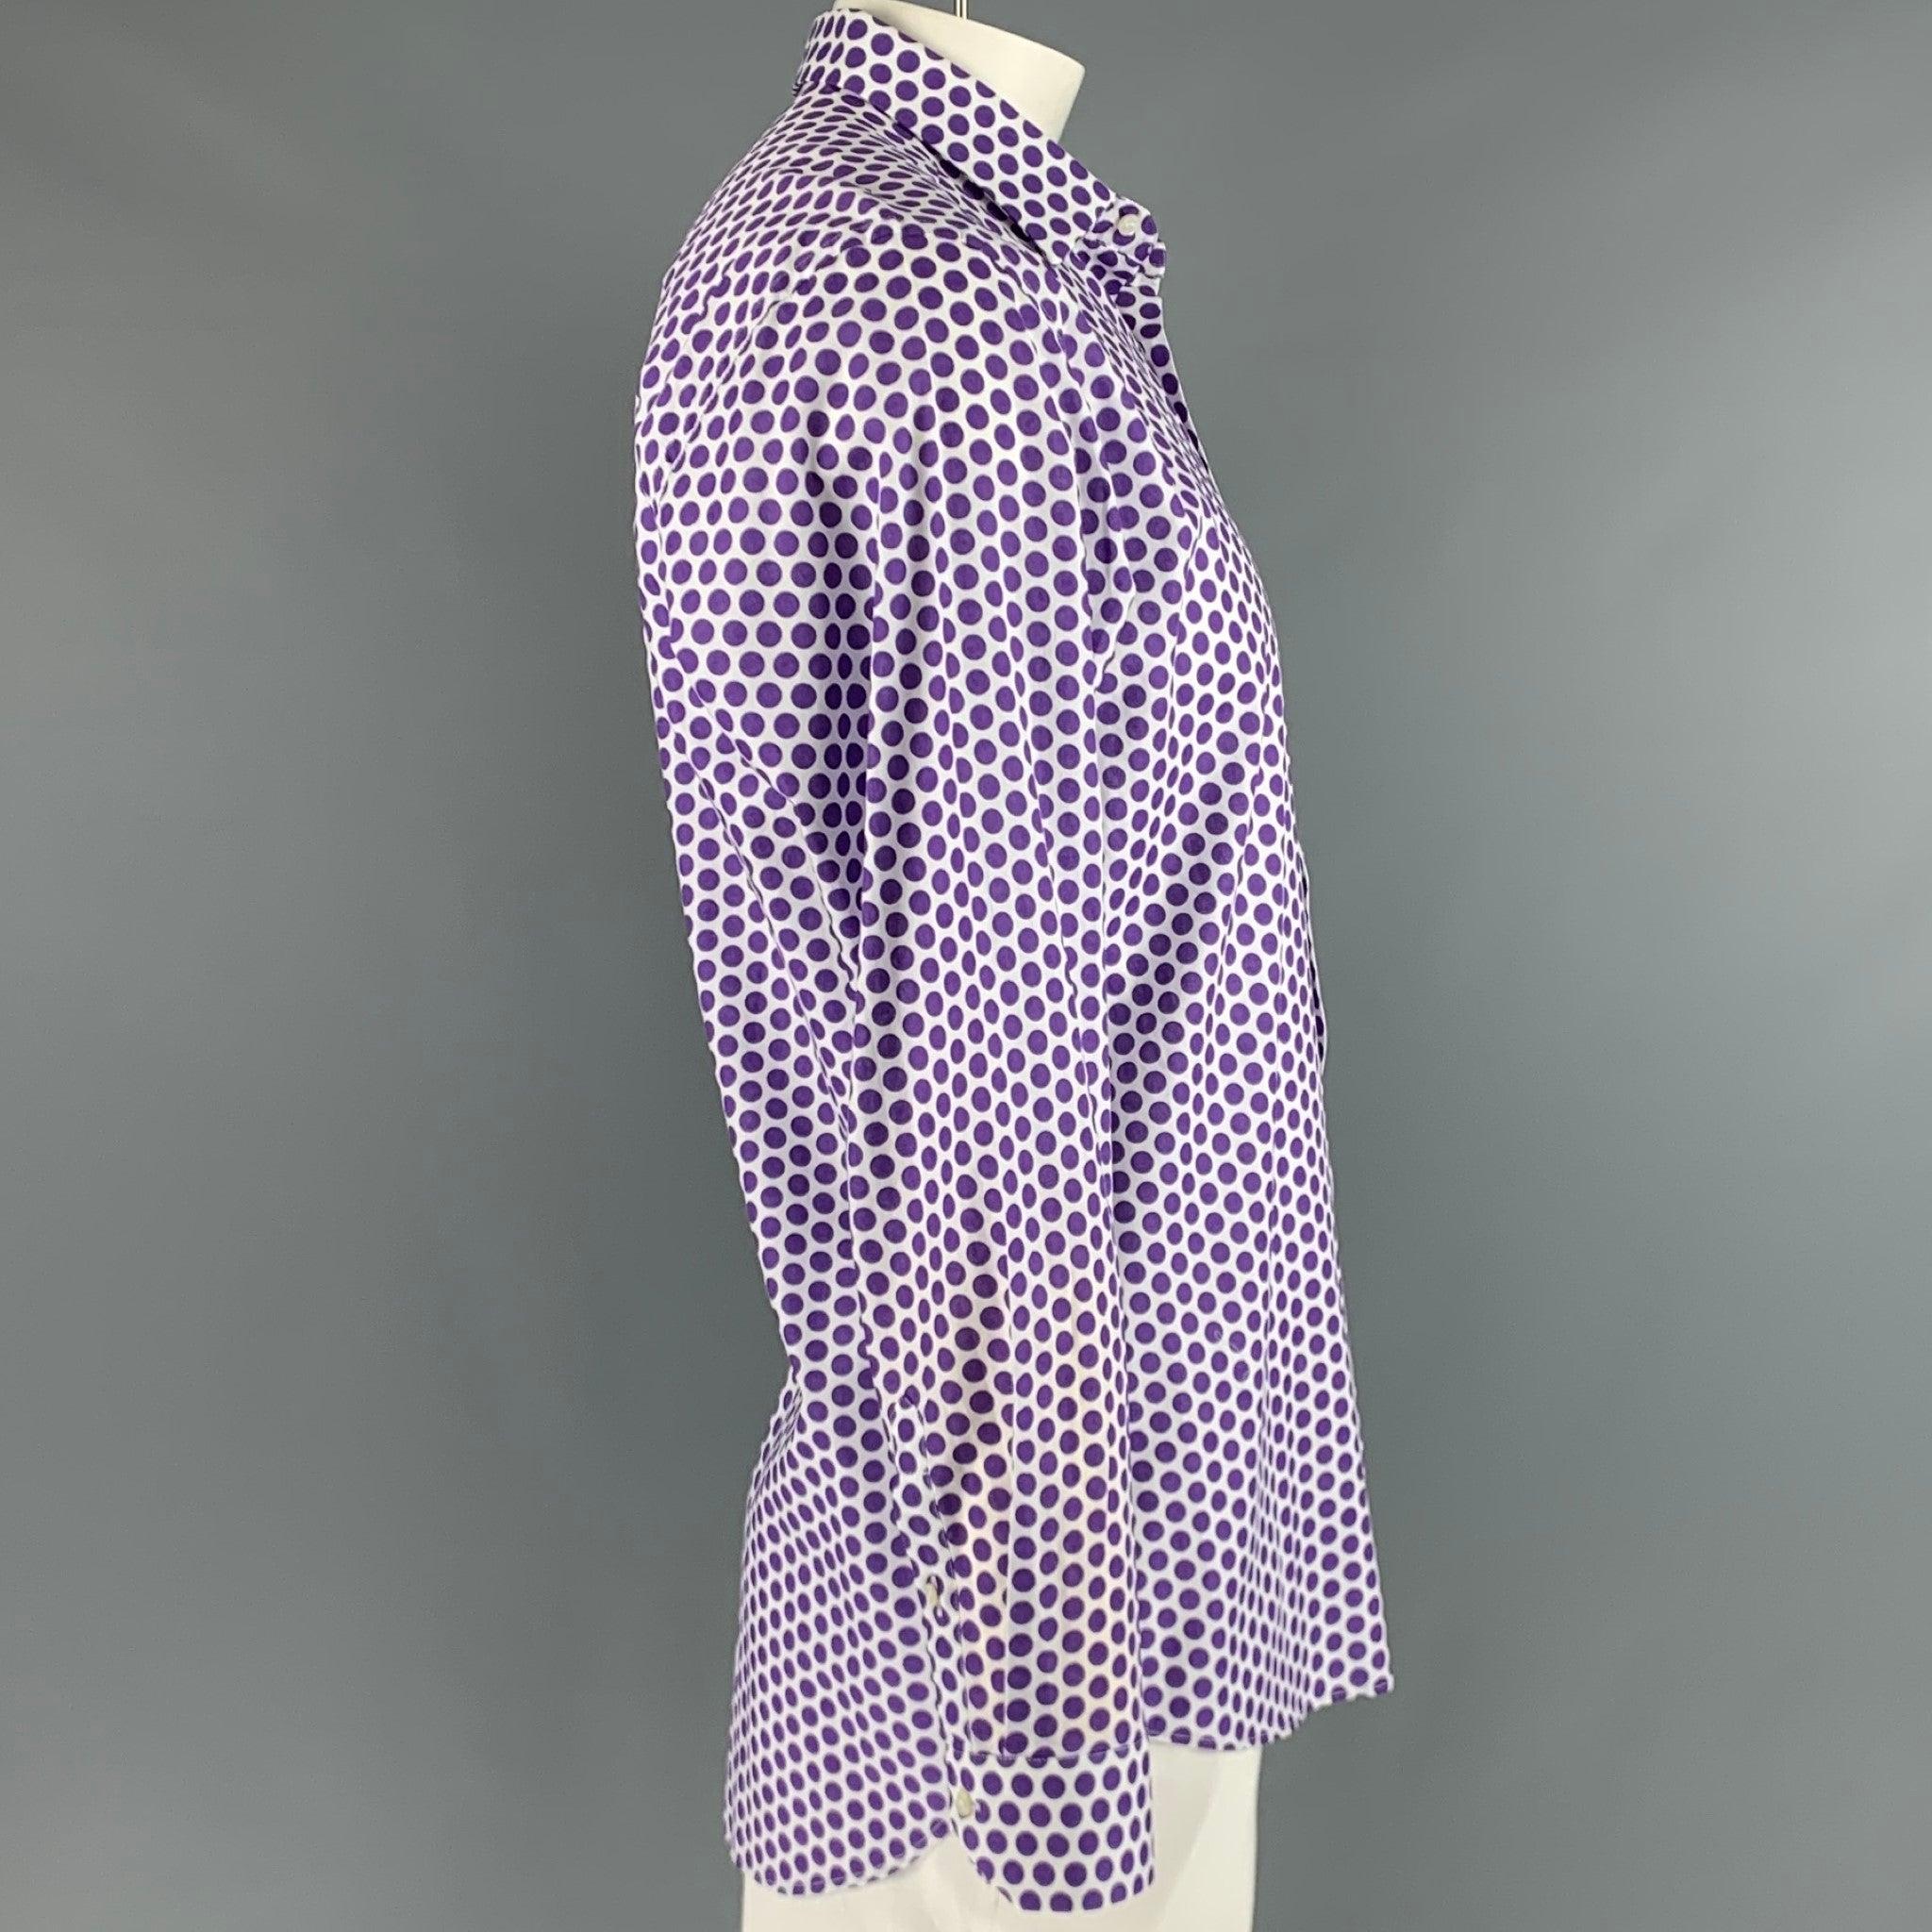 ETRO long sleeve shirt
in a
purple and white cotton weave featuring a polka dot pattern, spread collar, and button closure. Made in Italy.Very Good Pre-Owned Condition. Moderate signs of wear inside of collar. 

Marked:   43 

Measurements: 
